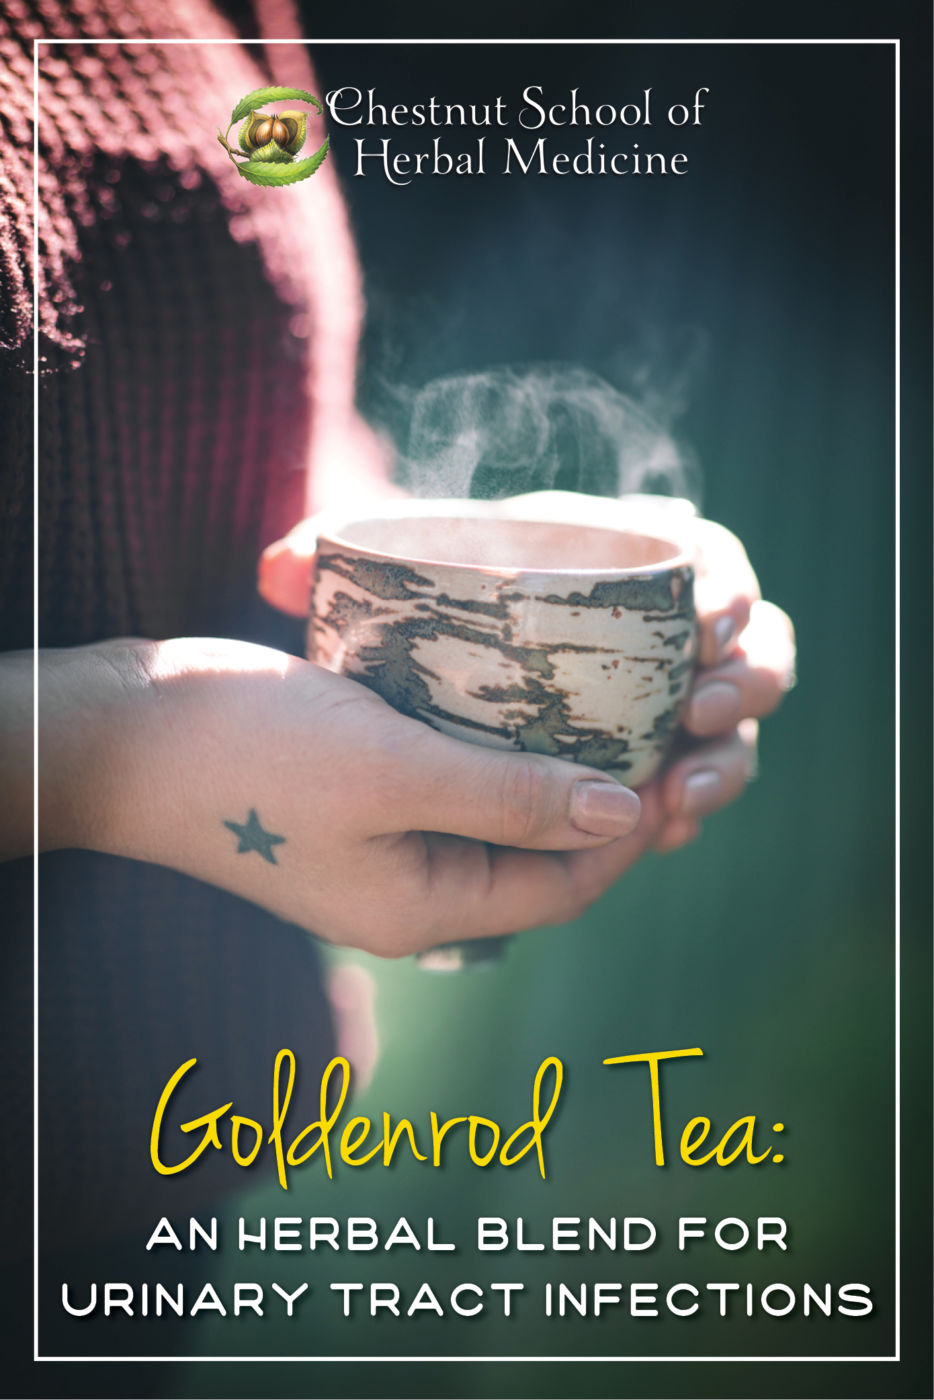 Goldenrod Tea An Herbal Blend for Urinary Tract Infections